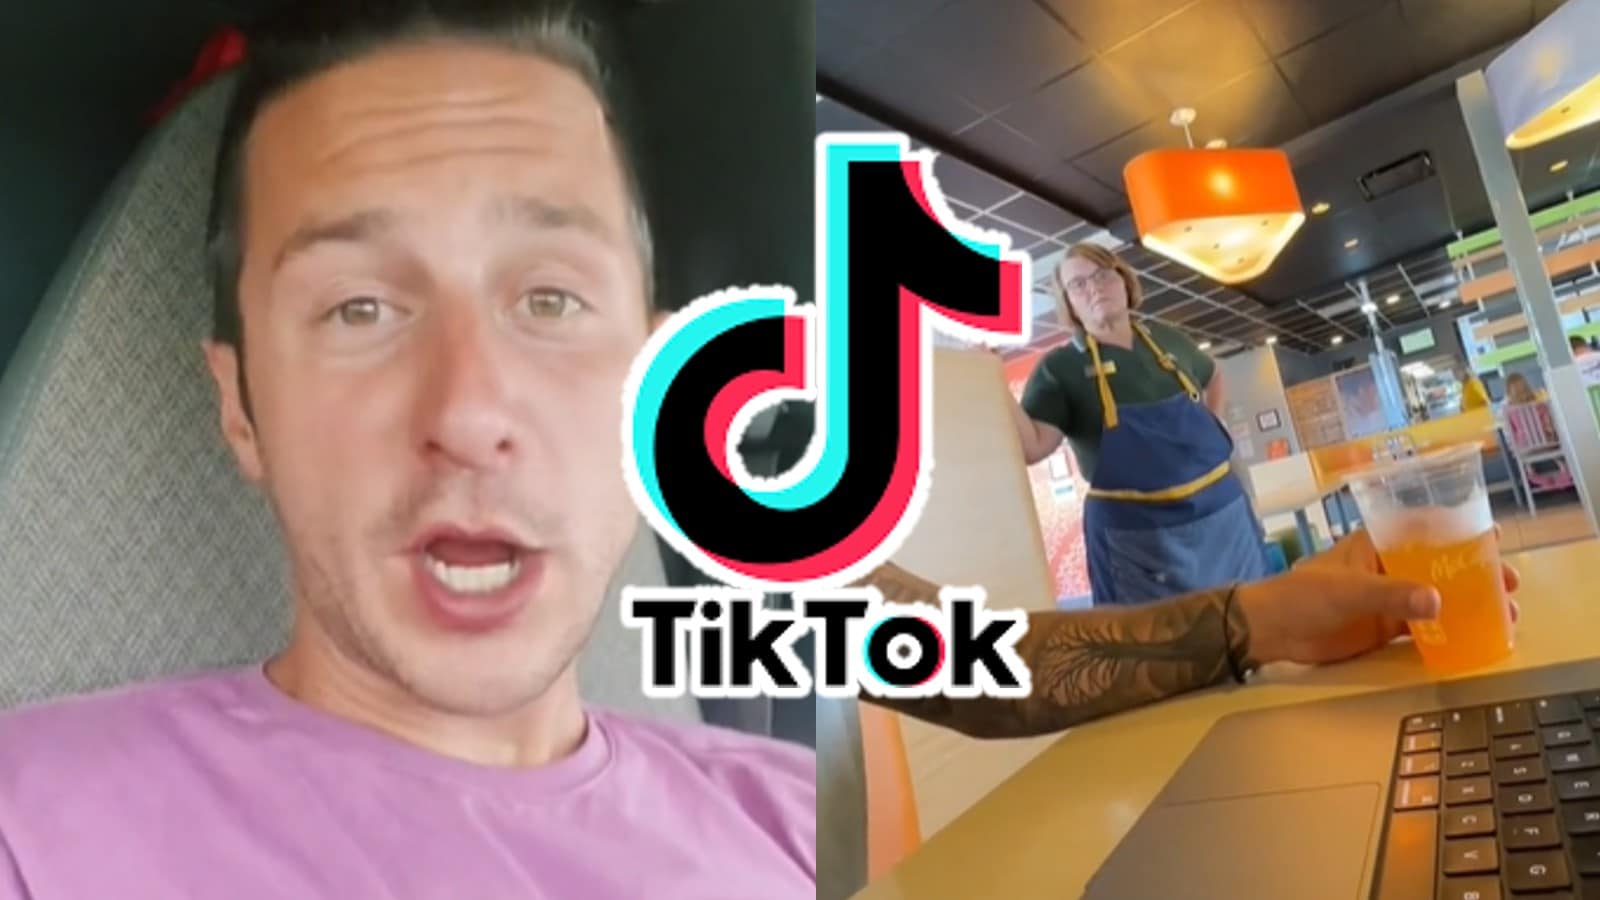 TikTok creator gets kicked out of McDonald's for "loitering"